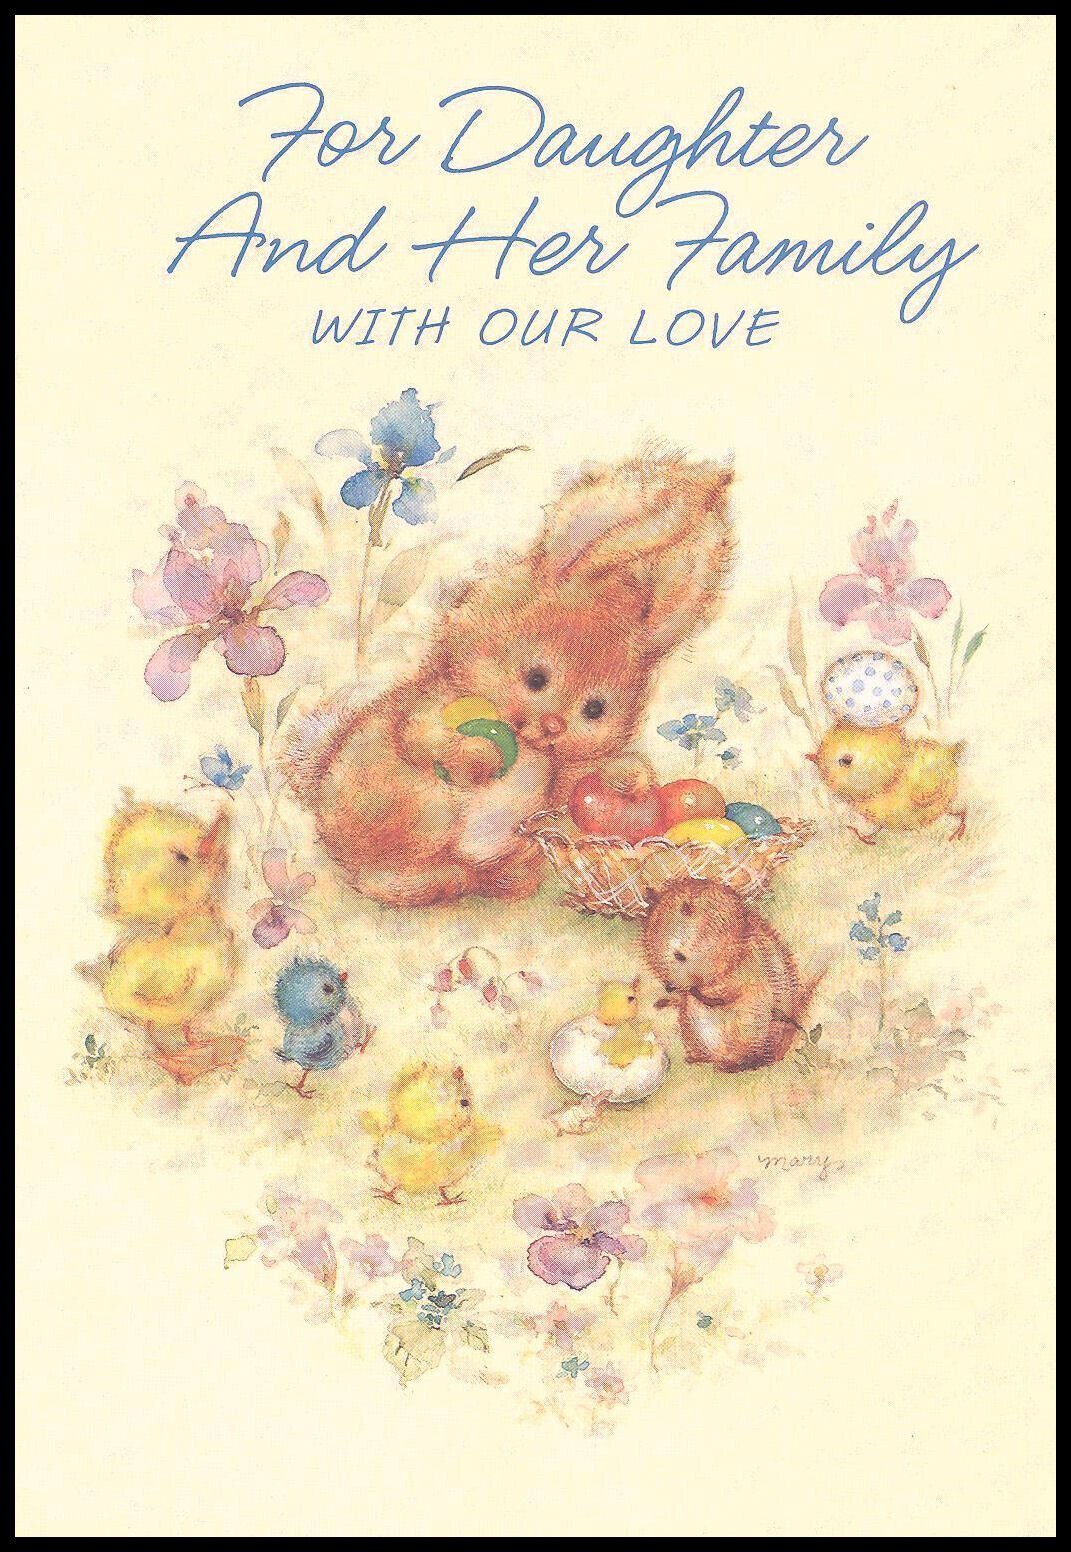 Greeting Card-Chipmunk Rabbit Squirrel-For Daughter-Mary Hamilton-Easter-0032